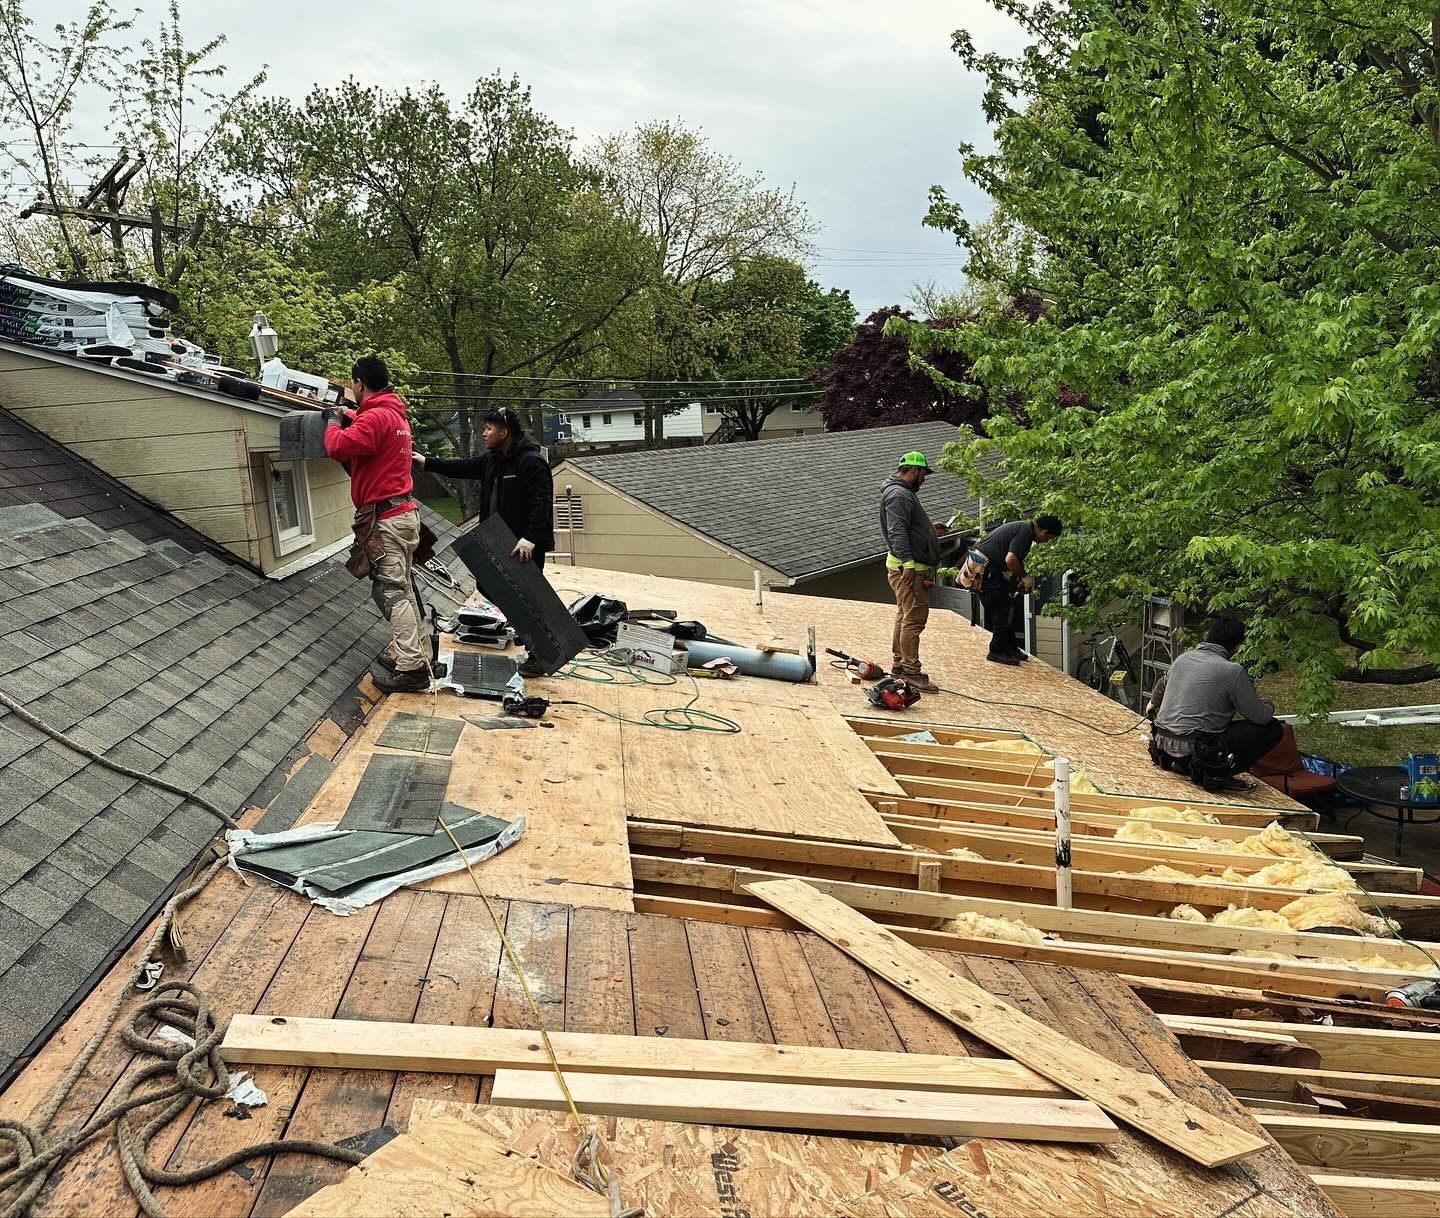 We&rsquo;ve got you covered! #roofing #annearundel #homeimprovement #renovation